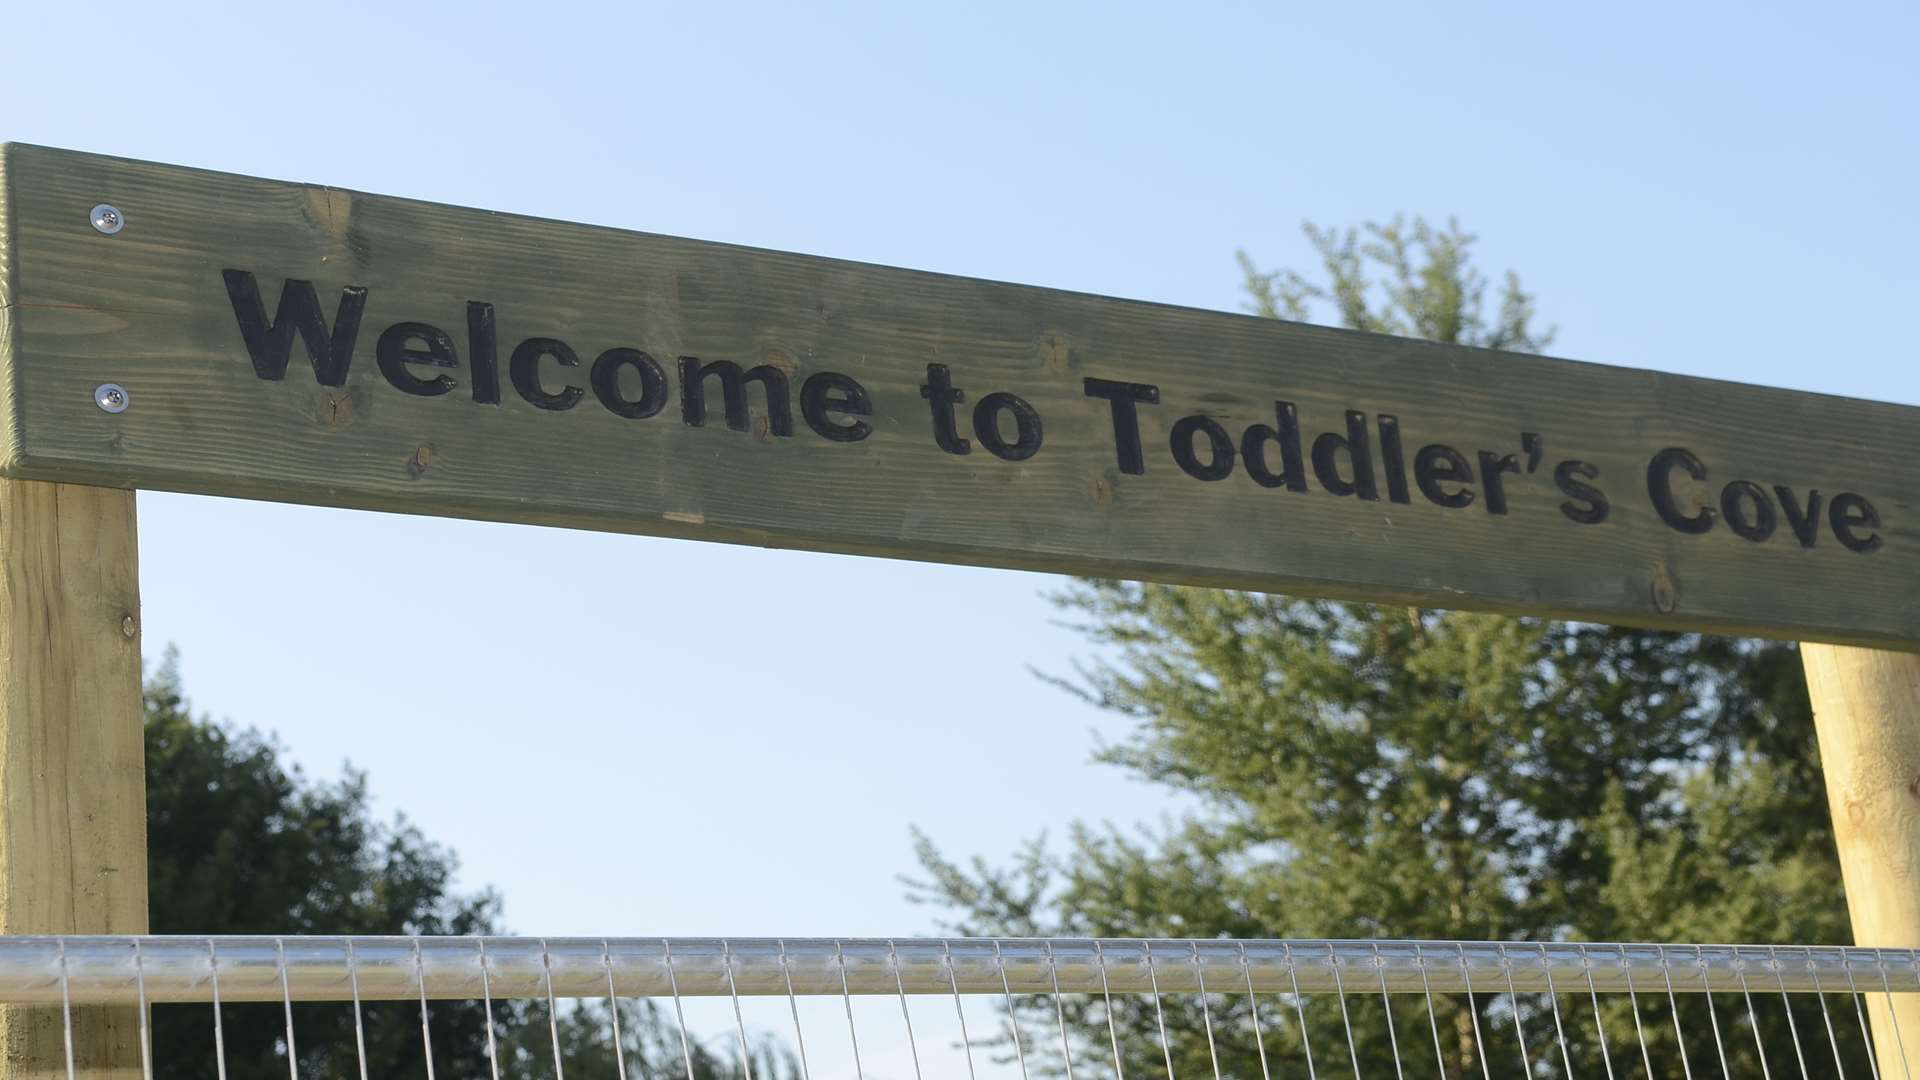 The entrance to Toddler's Cove